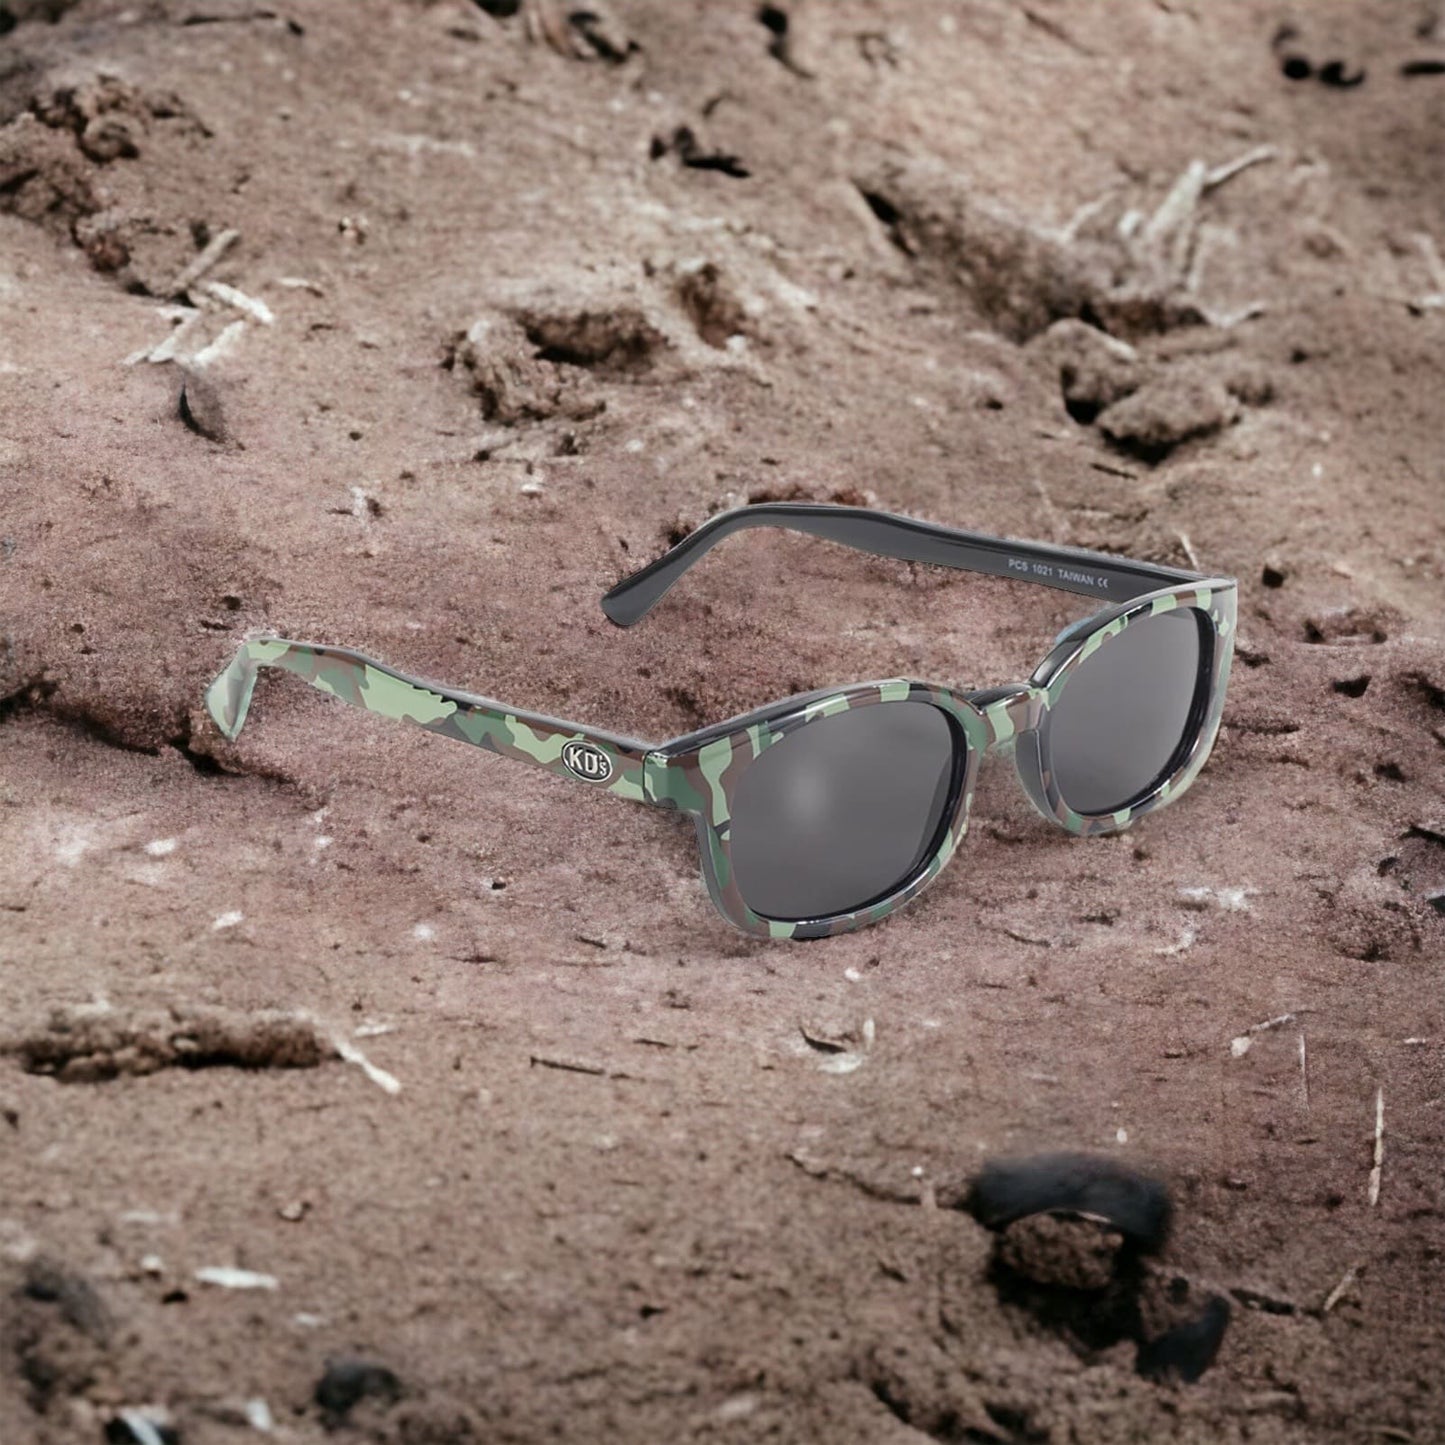 The X-KD's 1021 sunglasses with grey lenses and a military camo frame decor on the beaten earth